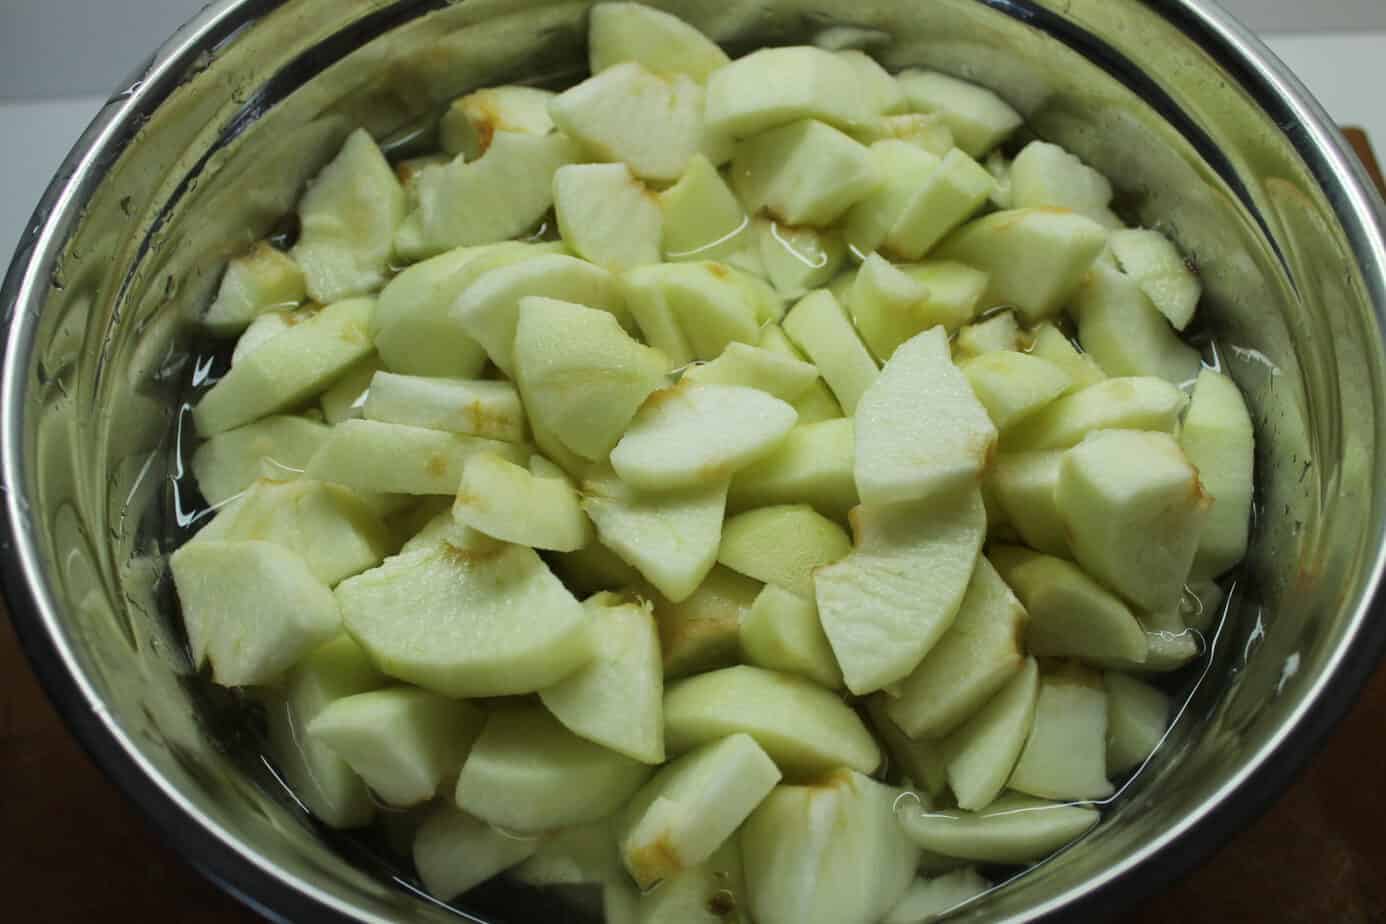 Peeled and cored apples sliced in a stainless steel bowl